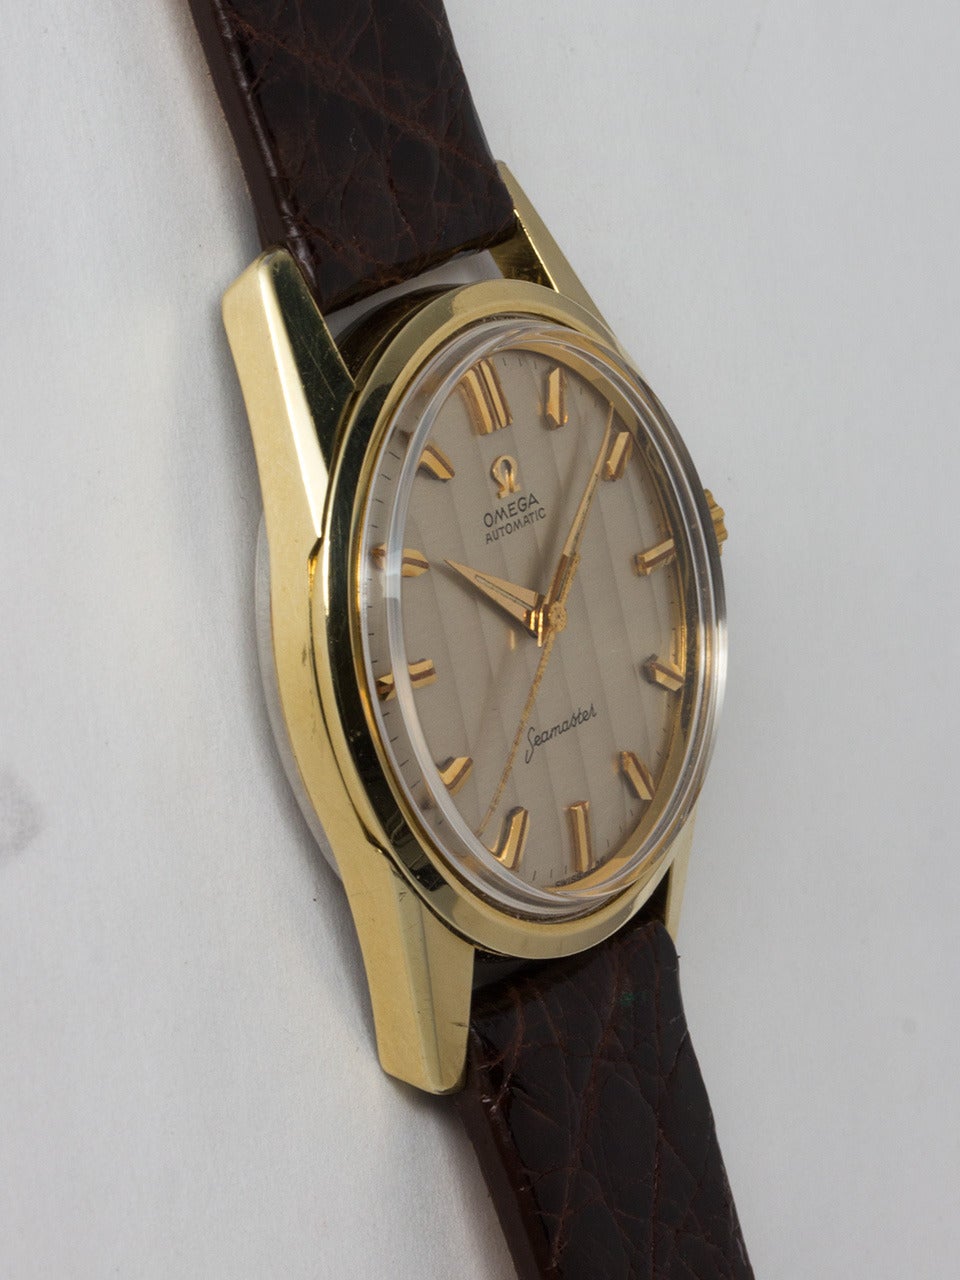 Omega Seamaster Automatic Wristwatch, ref 14700.1 SC movement serial # 18 million circa 1961. 33.5 x 43mm gold shell top case with stainless steel back with Seamaster logo and signed Omega crown. Original ribbed textured silvered dial with applied